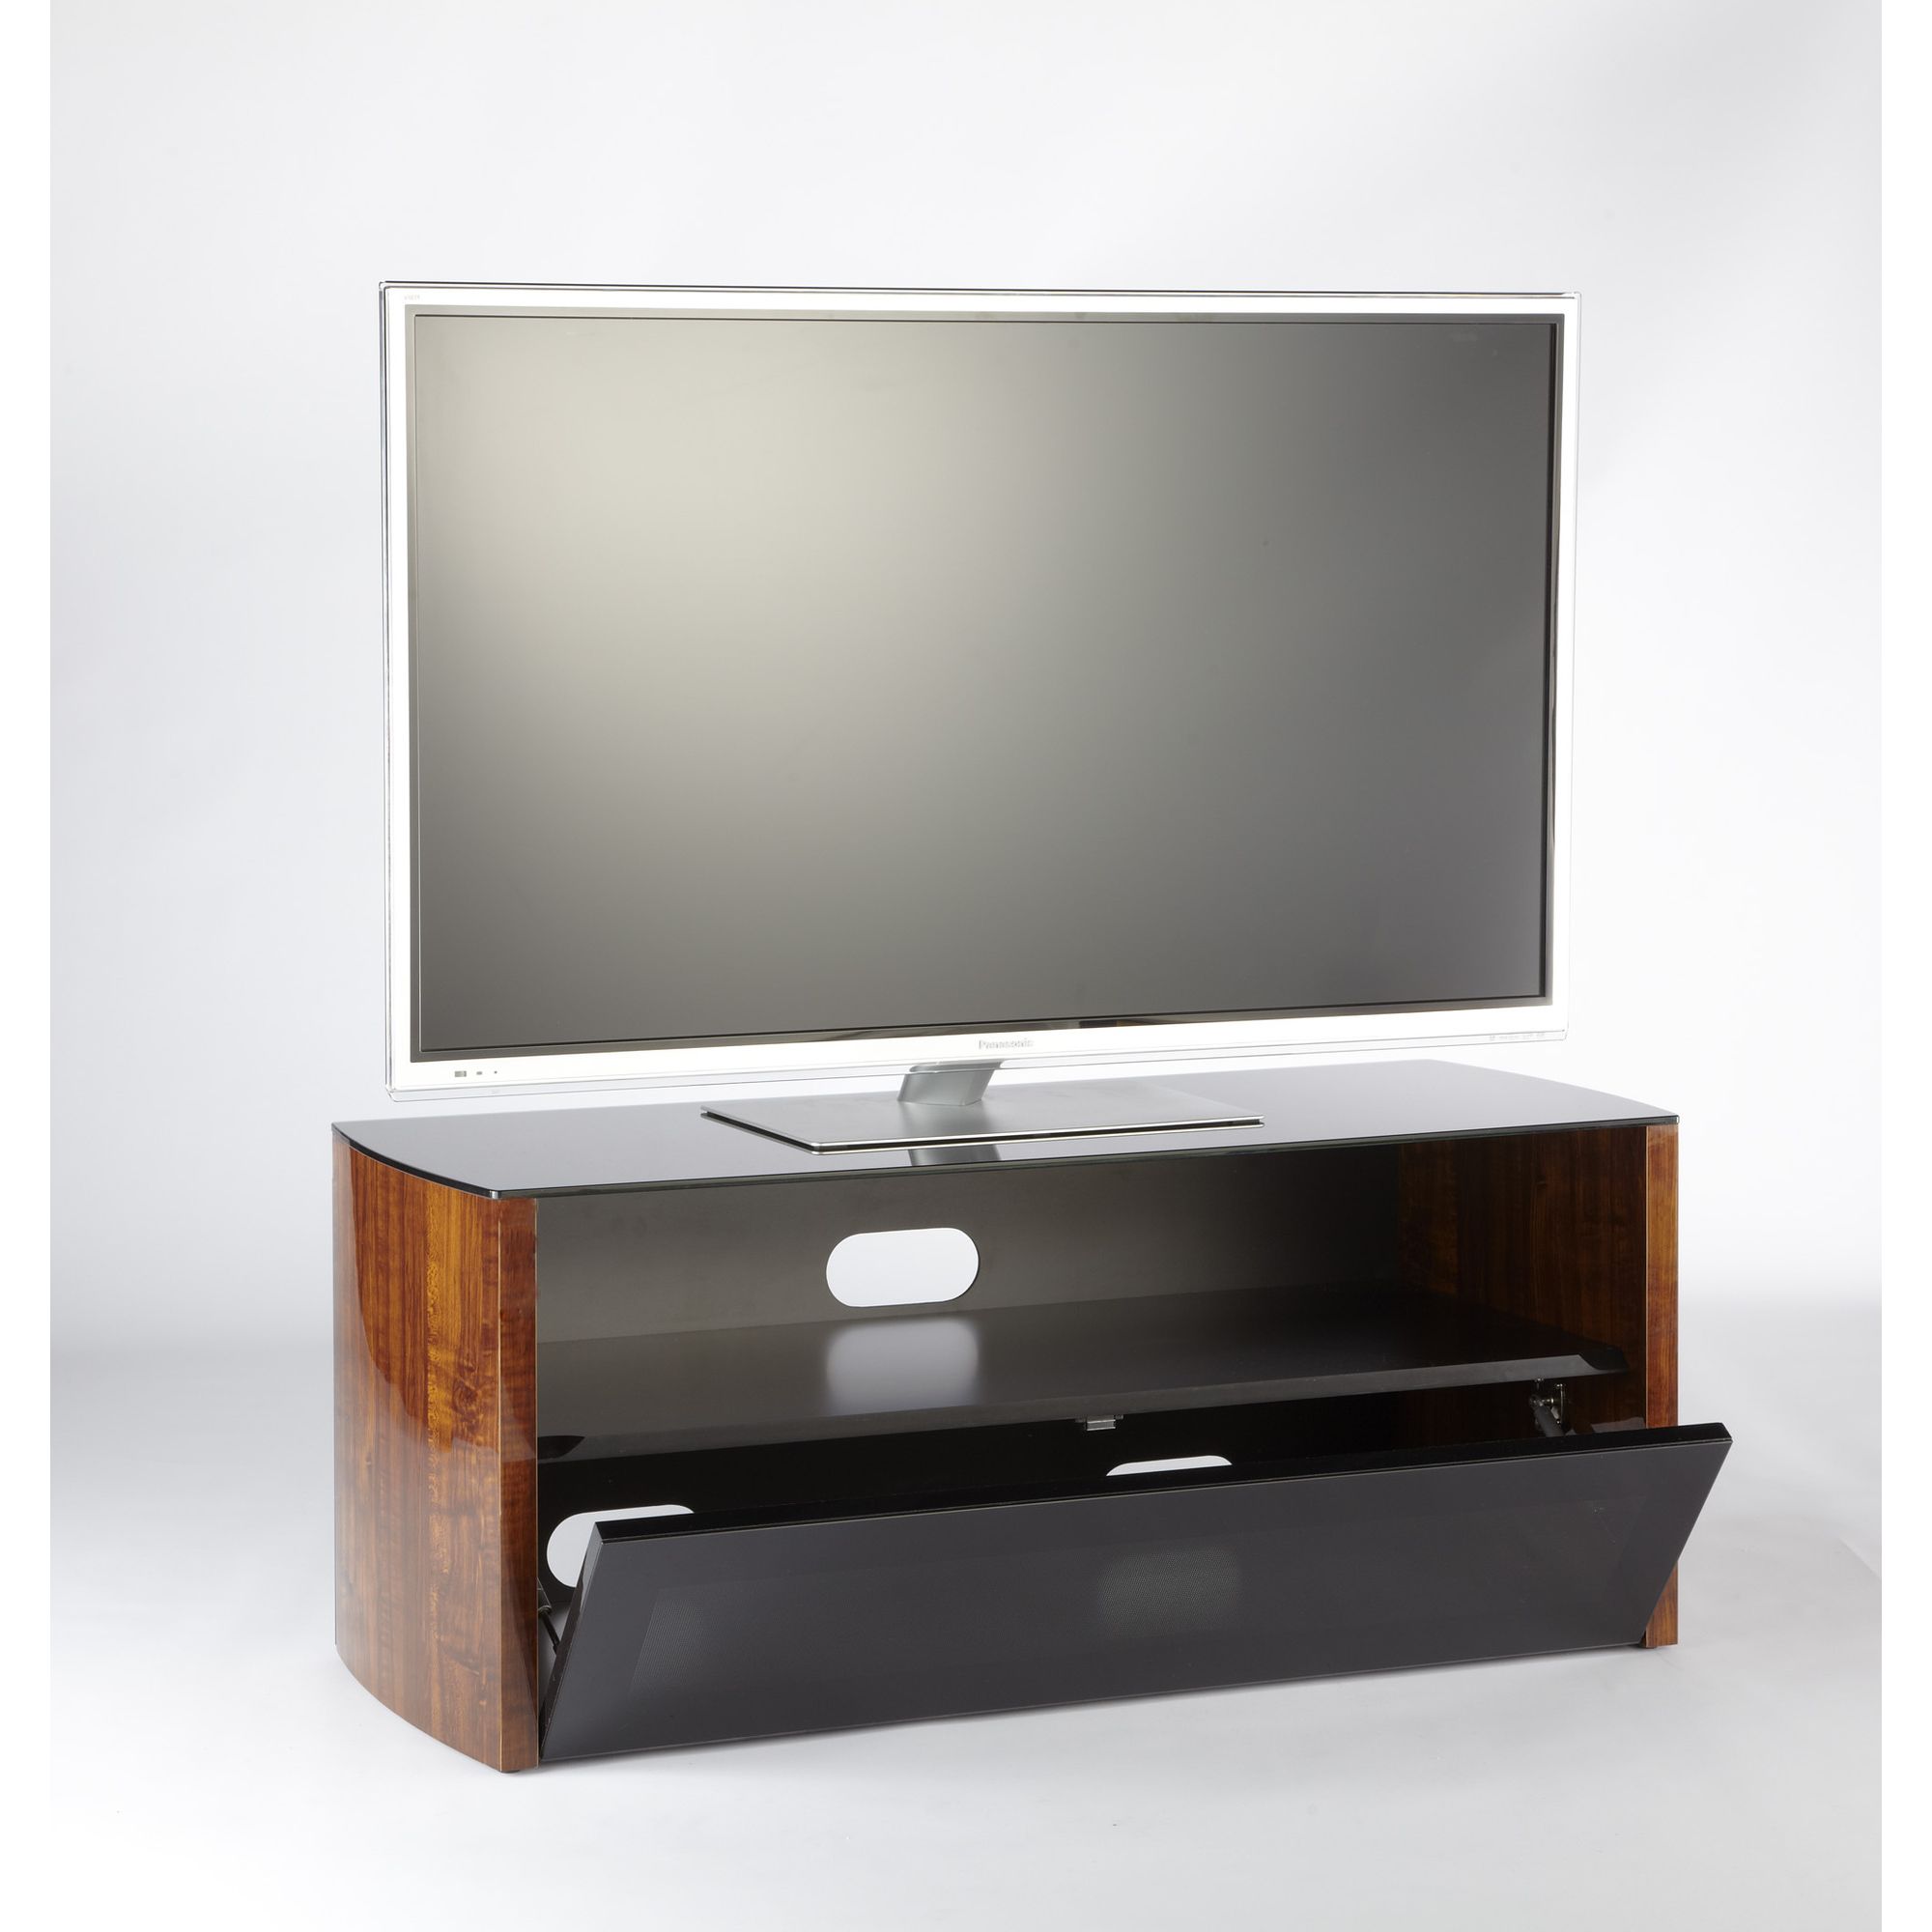 Iconic Acacia TV Stand - Walnut - 110cm at Tesco Direct